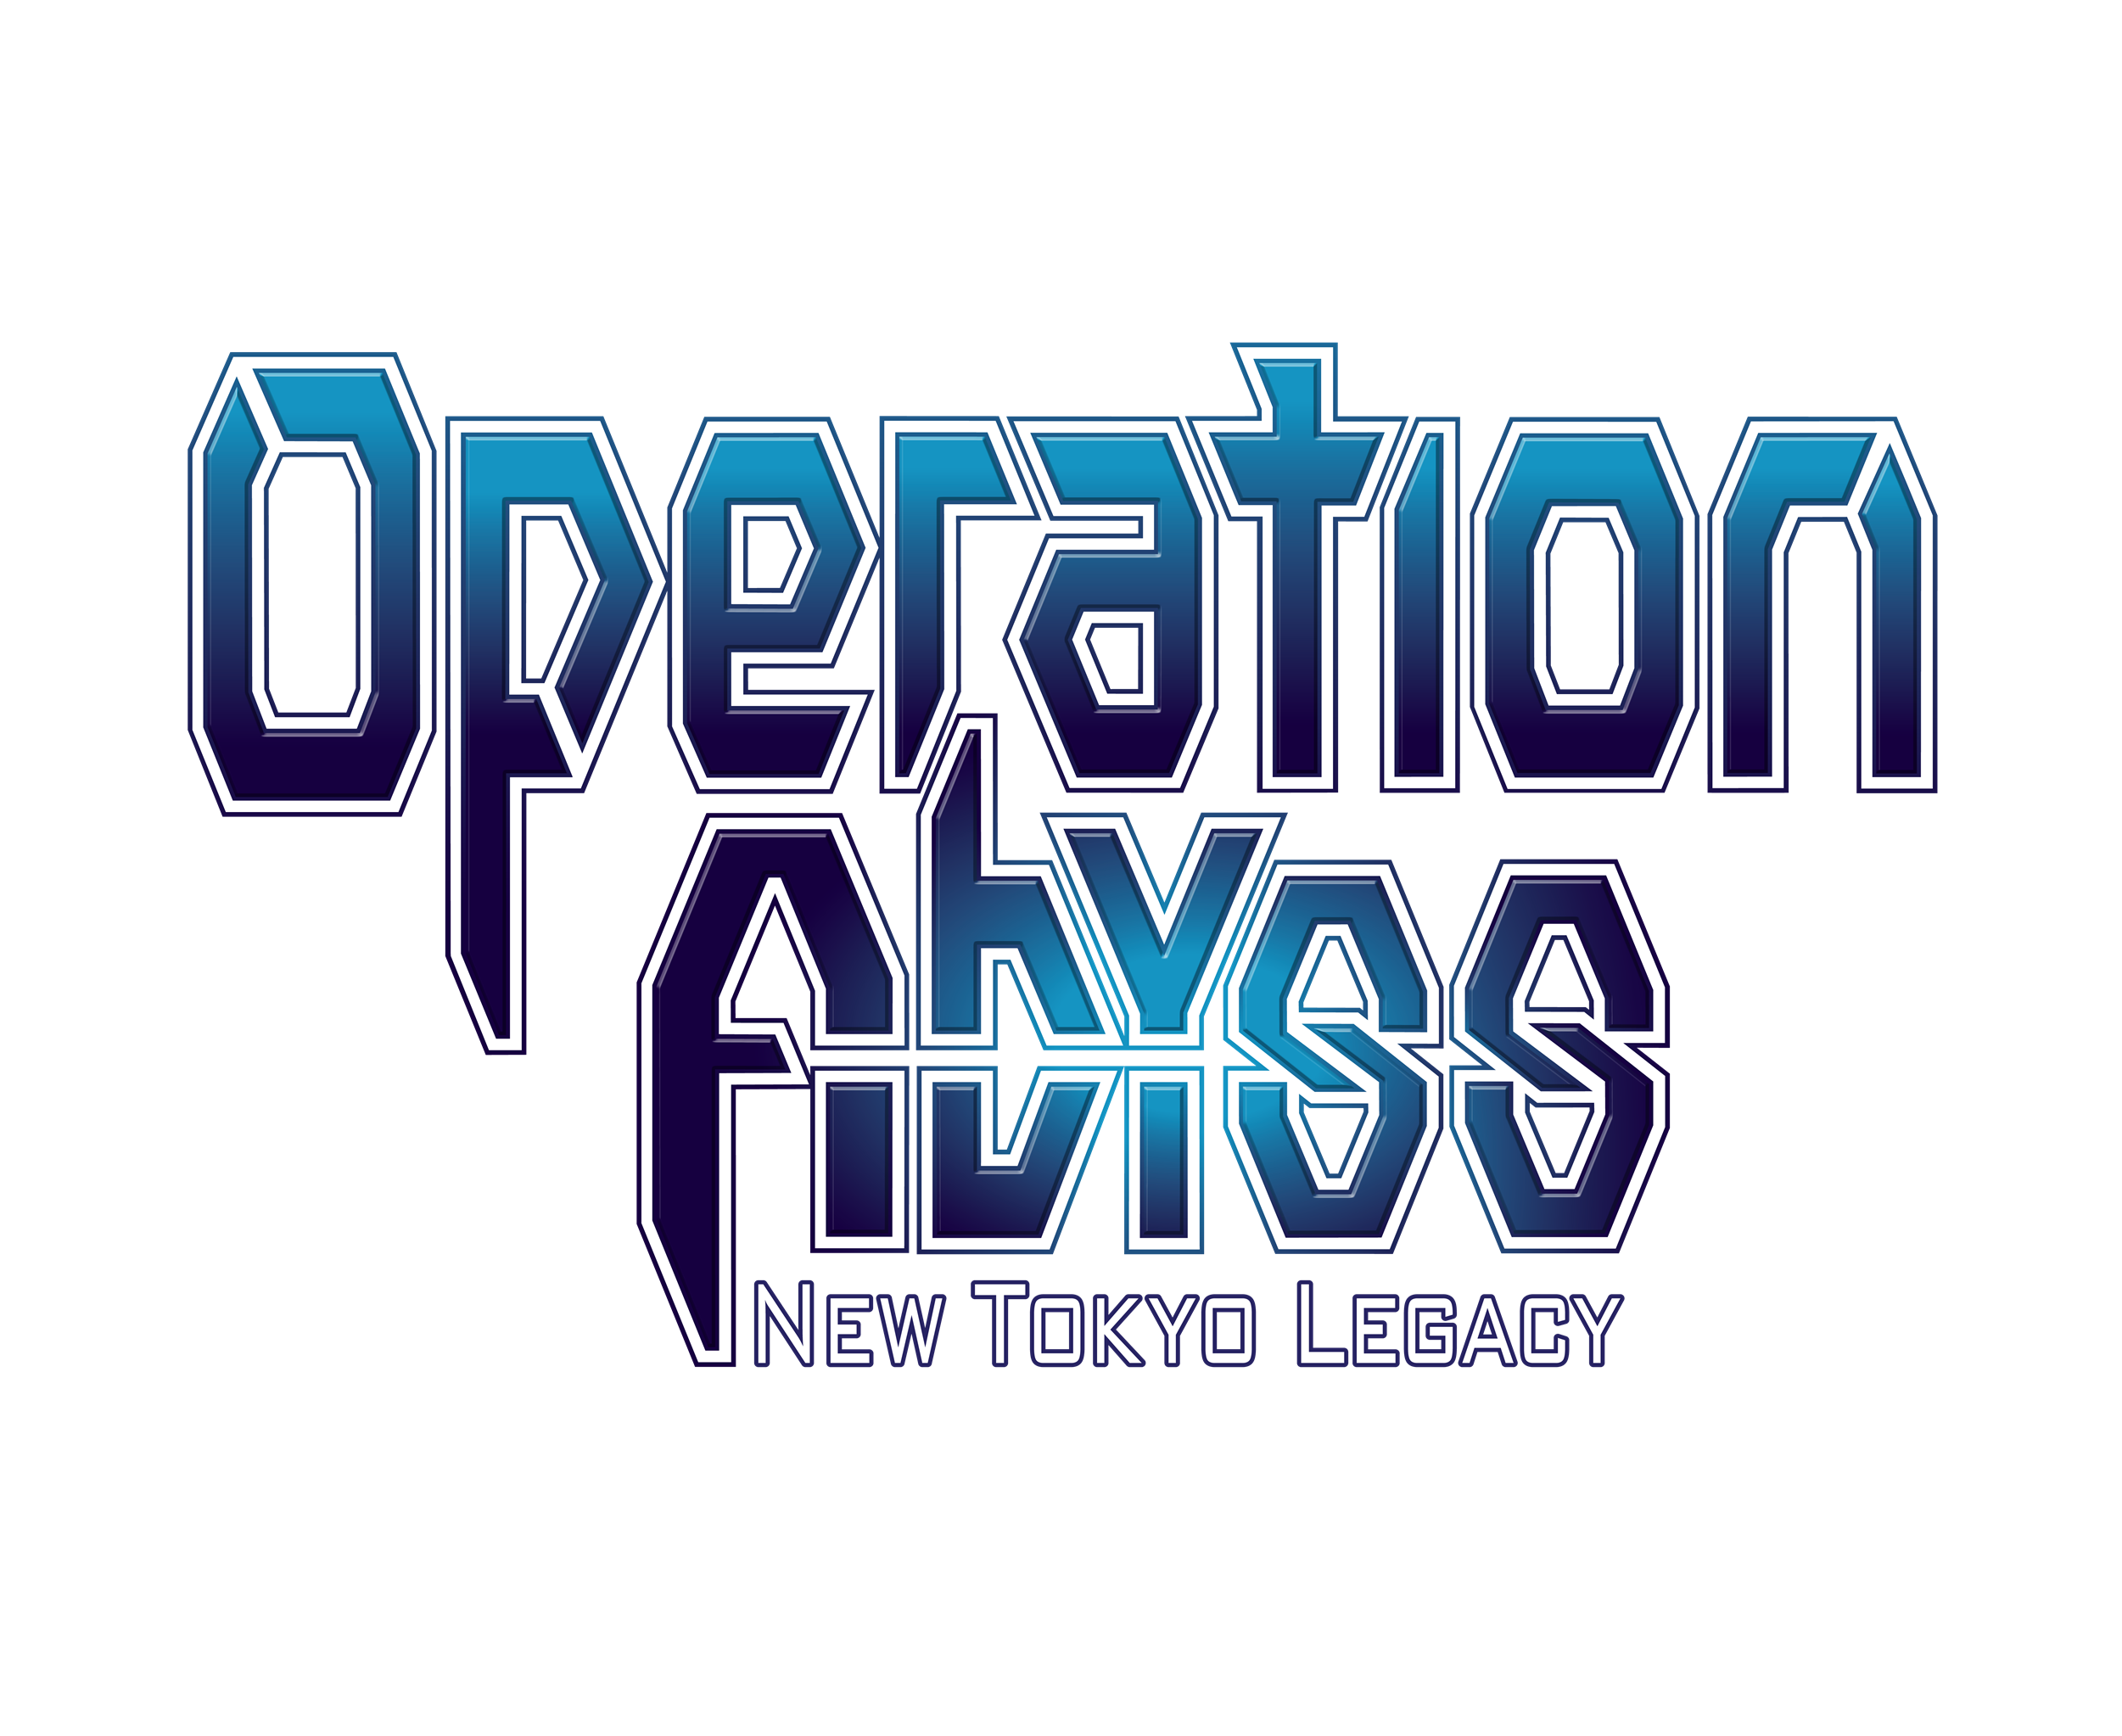 Tokyo New World Record: Operation Abyss OperationAbyss_LOGO_CLEAN